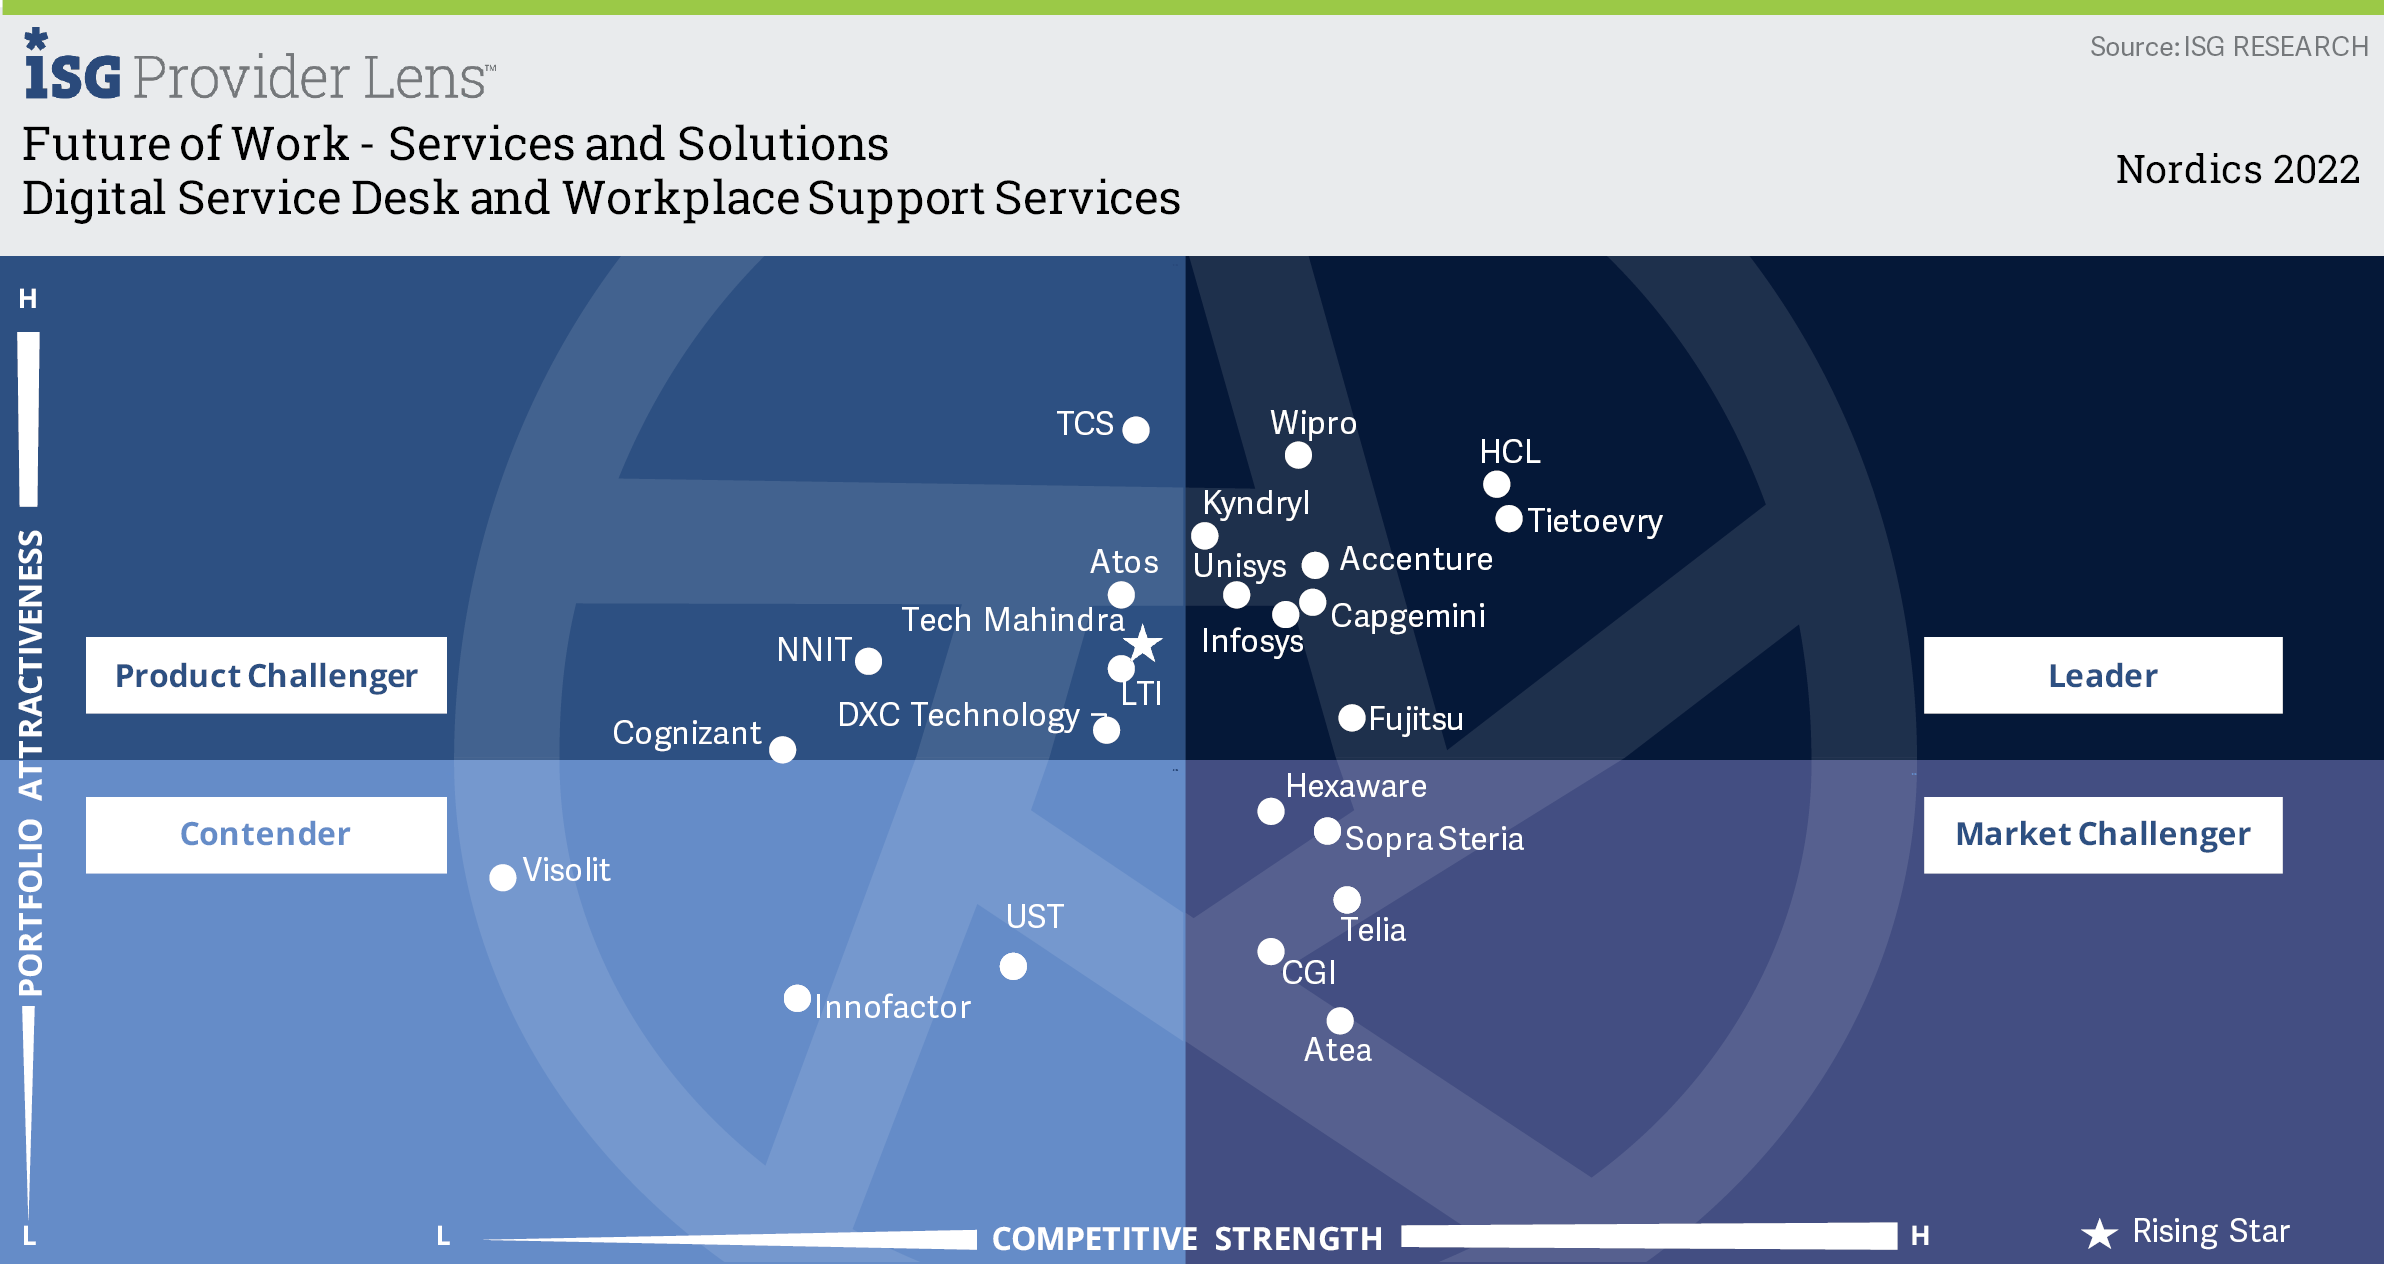 Quadrant: Digital Service Desk and Workplace Support Services